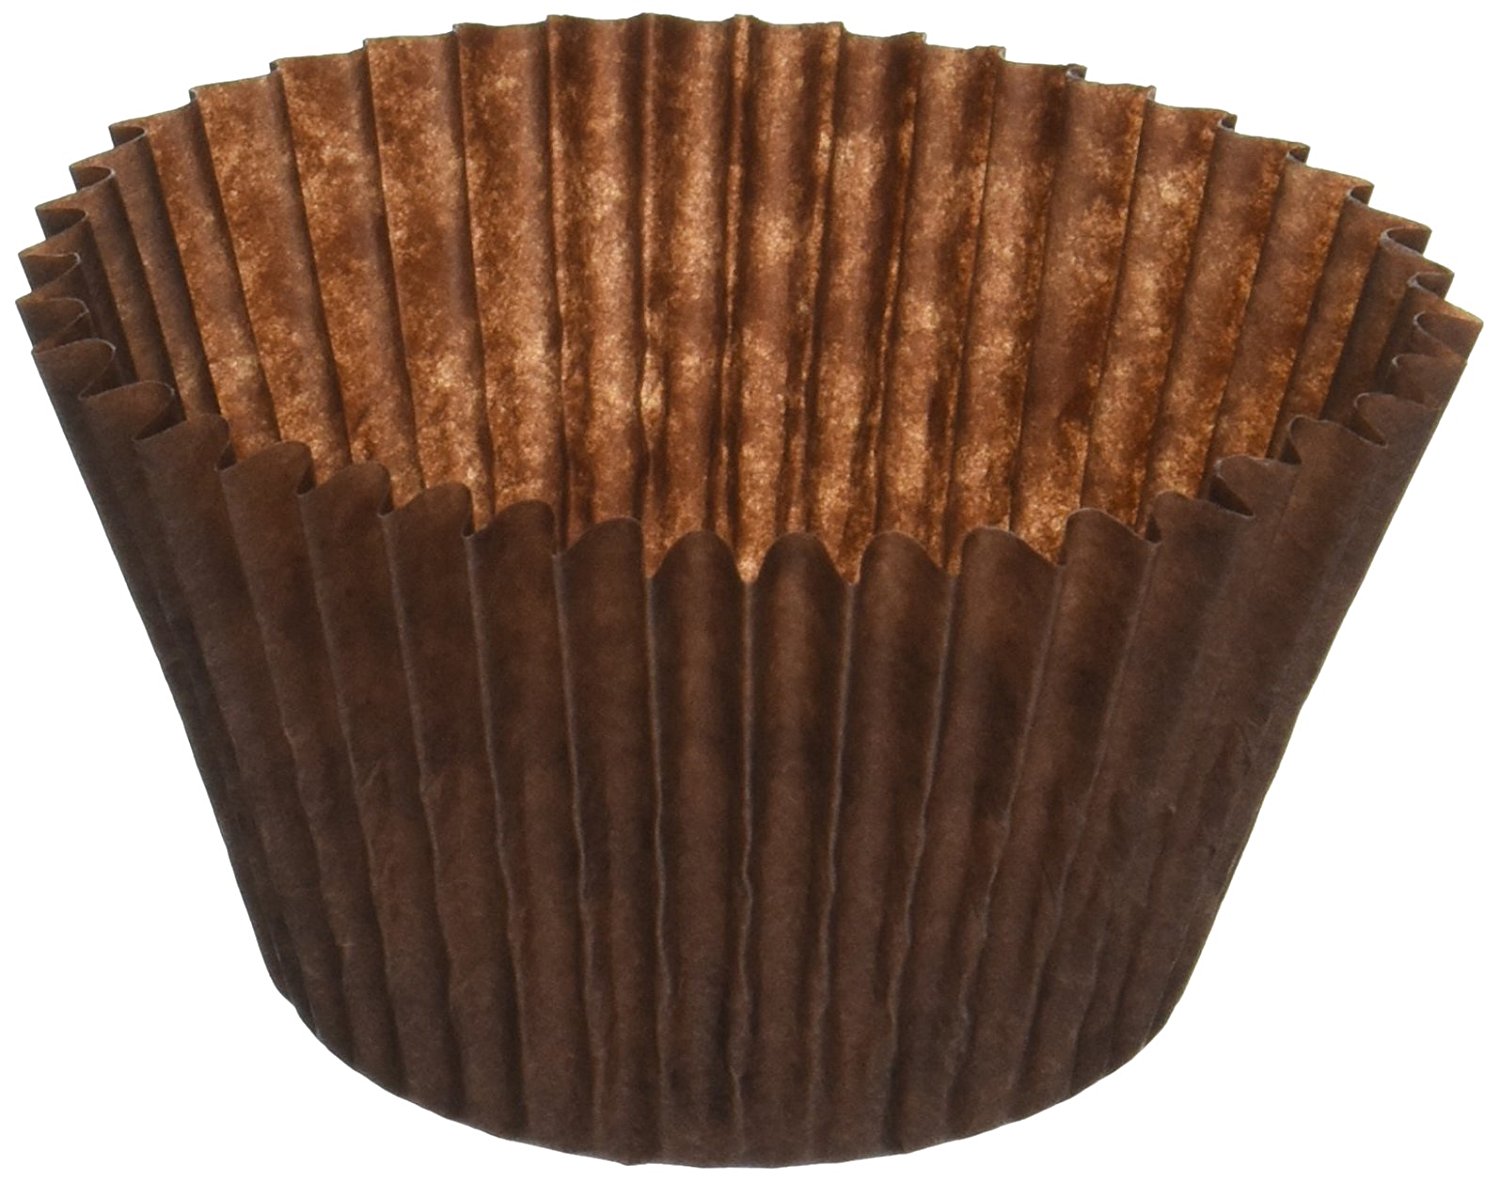 decony-brown-standard-size-cupcake-paper-baking-cup-liners-made-in-usa